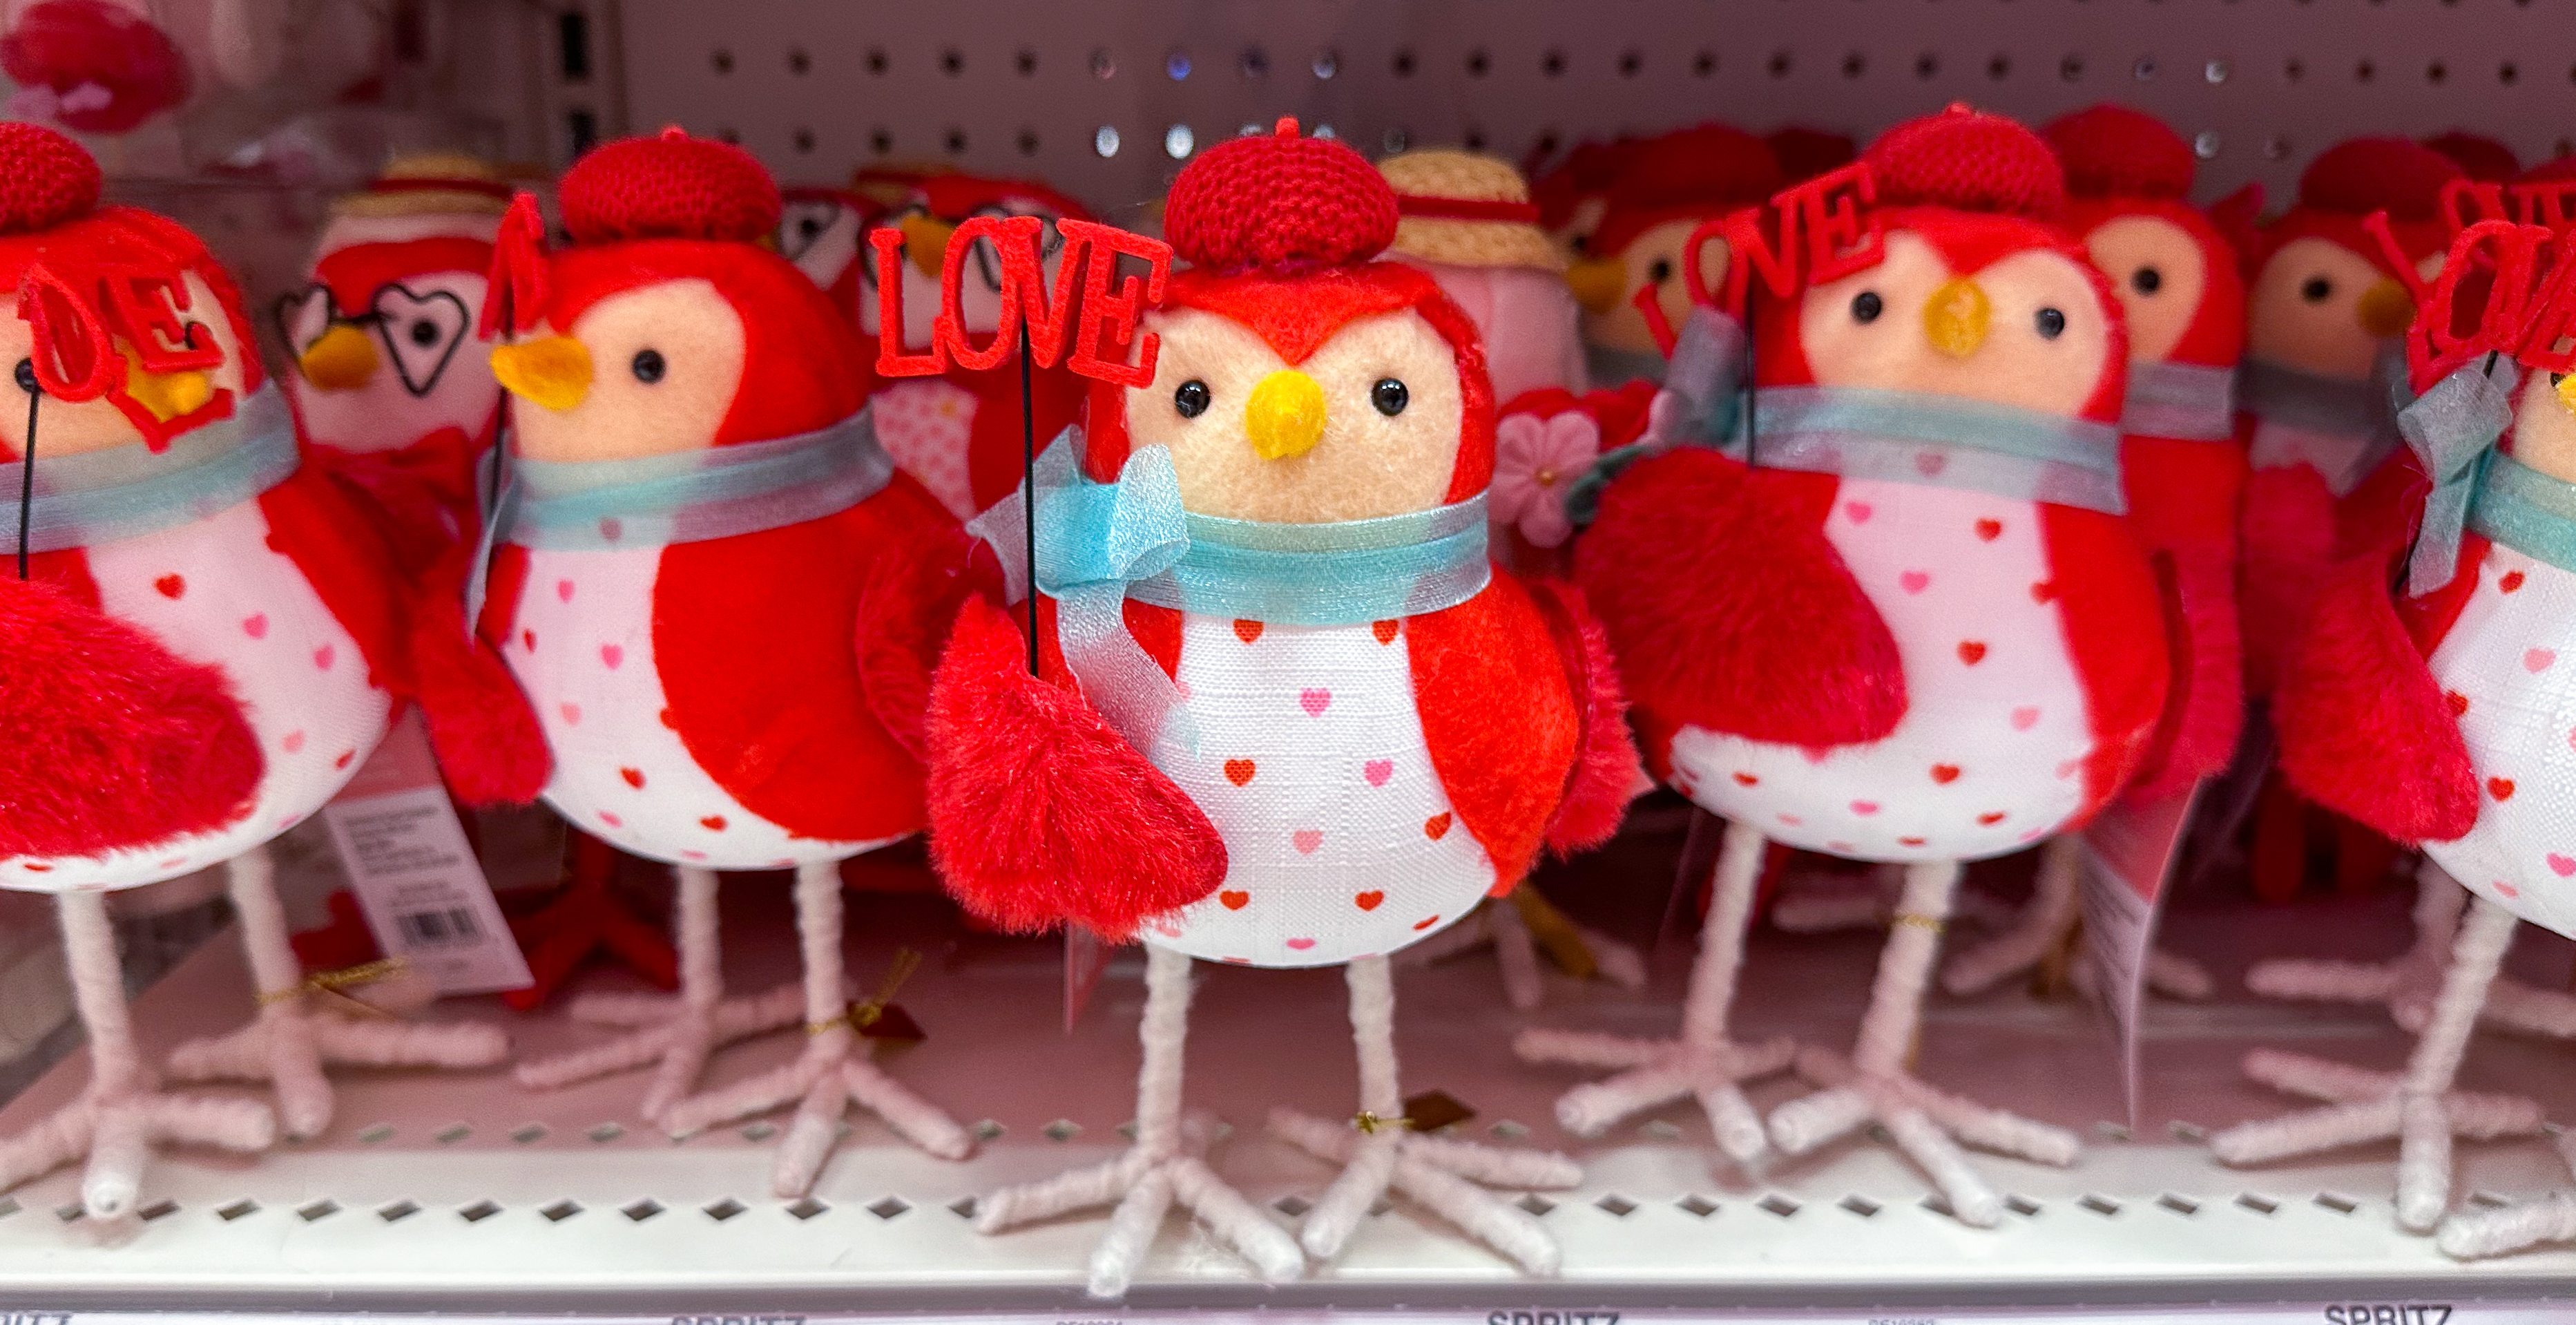 Target Valentine's Day: Gifts and Decor Under $10 - The Krazy Coupon Lady